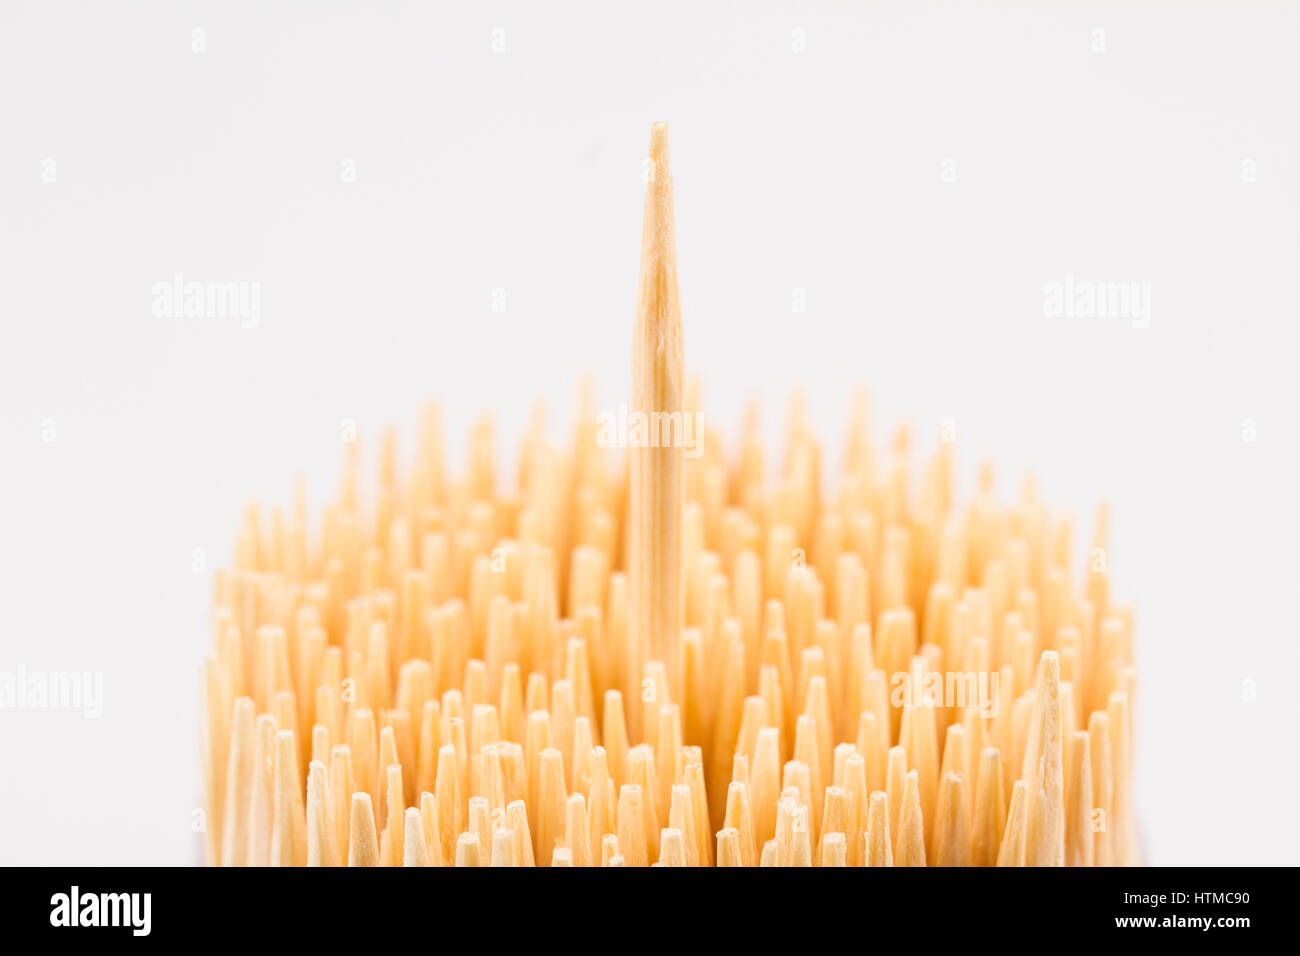 horizontal top view close up of wooden bamboo toothpicks with one stick rising up isolated on white background Stock Photo